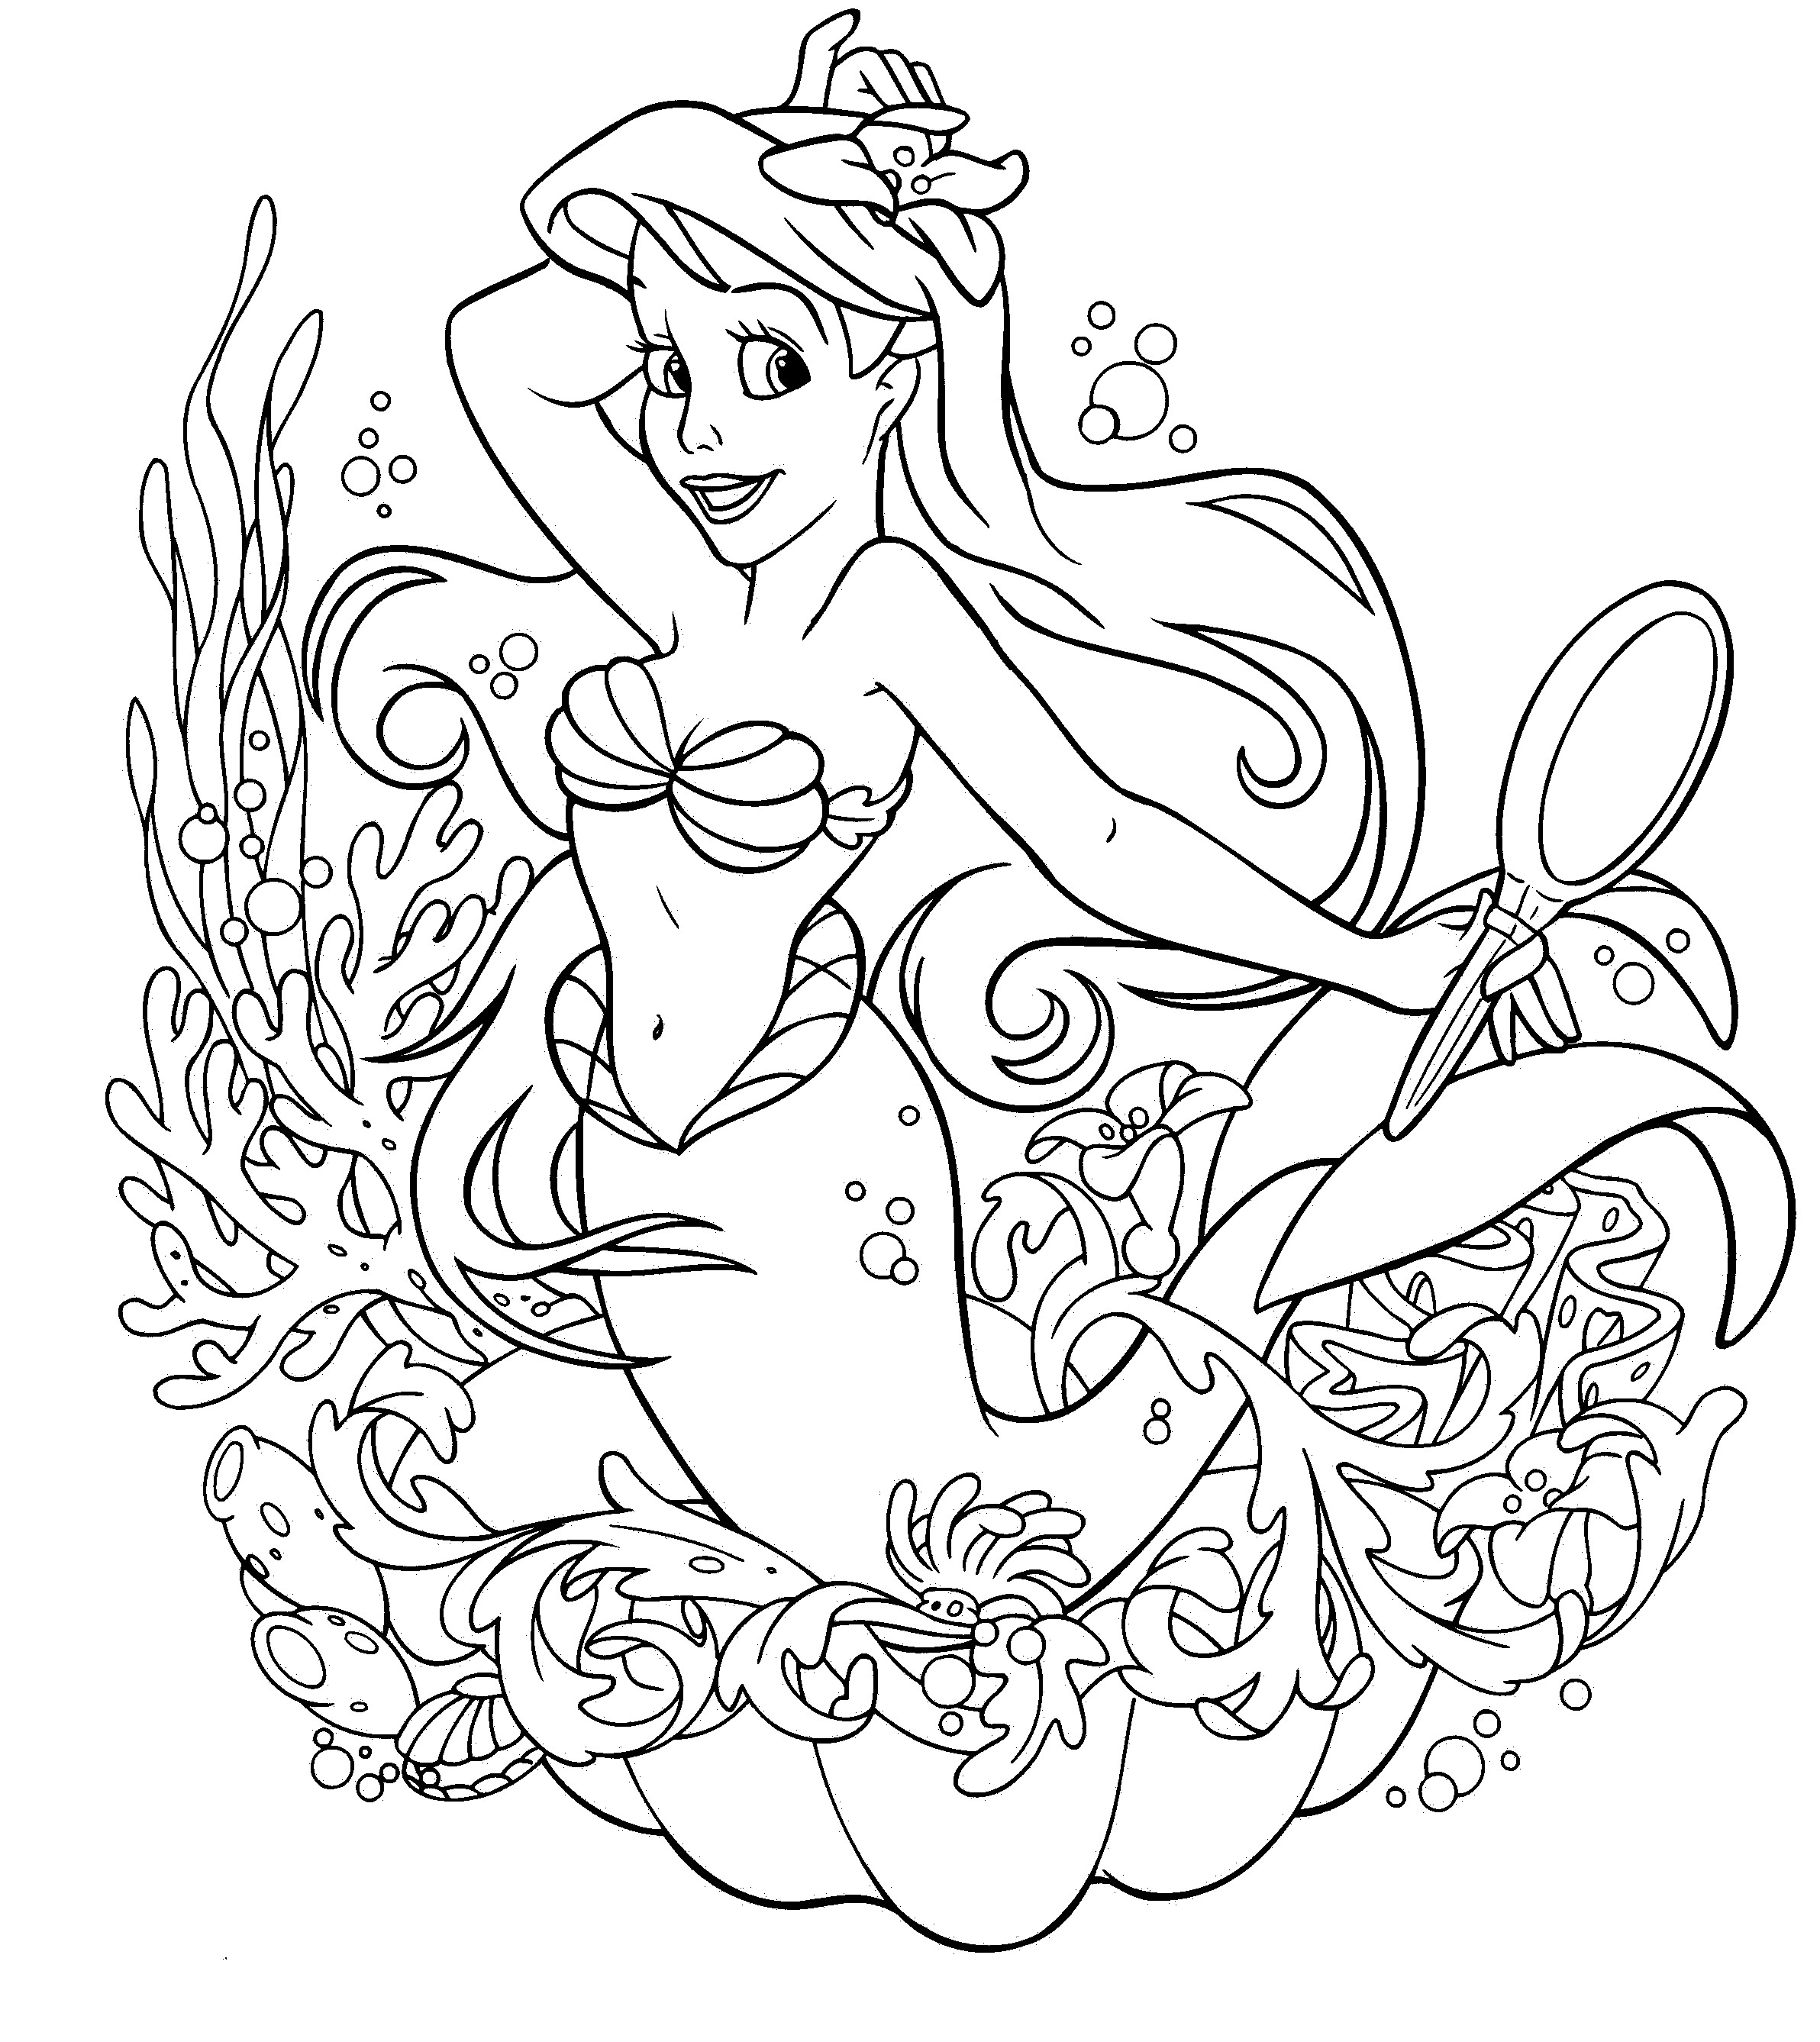 Coloring Sheets For Girls Printable Chrismas
 Coloring Pages for Girls Dr Odd